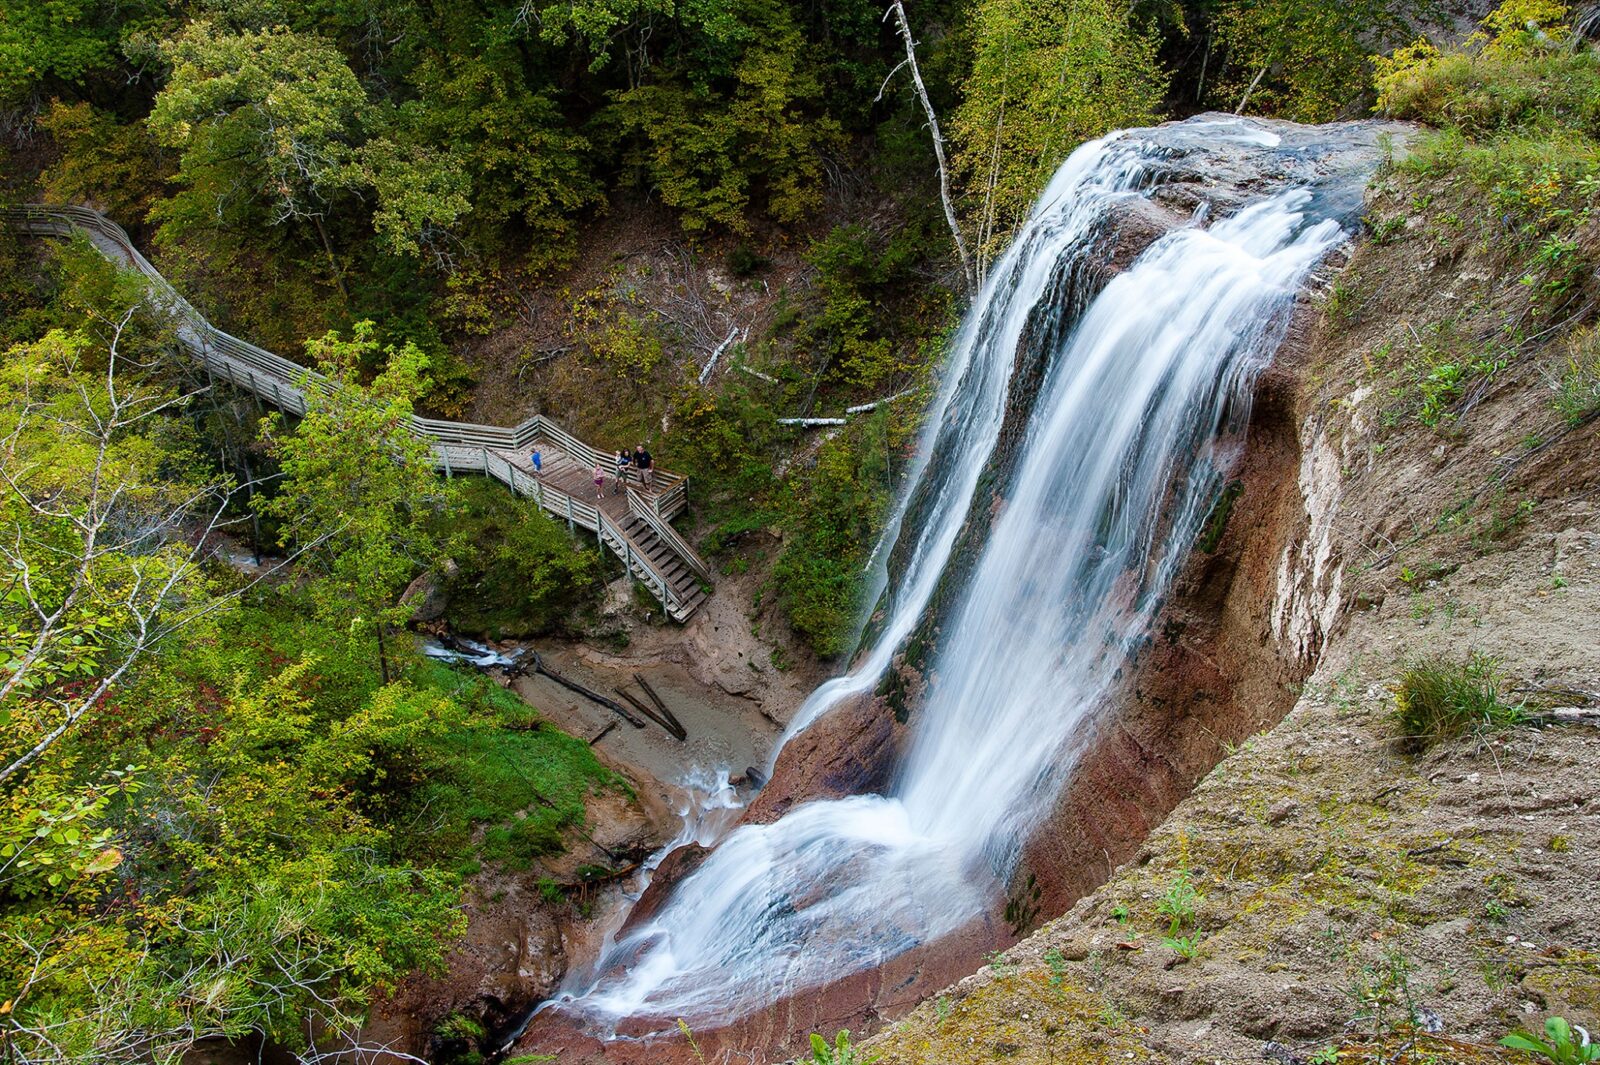 This Short Hike Leads To A Breathtaking 63 Foot Waterfall You Need To See To Believe